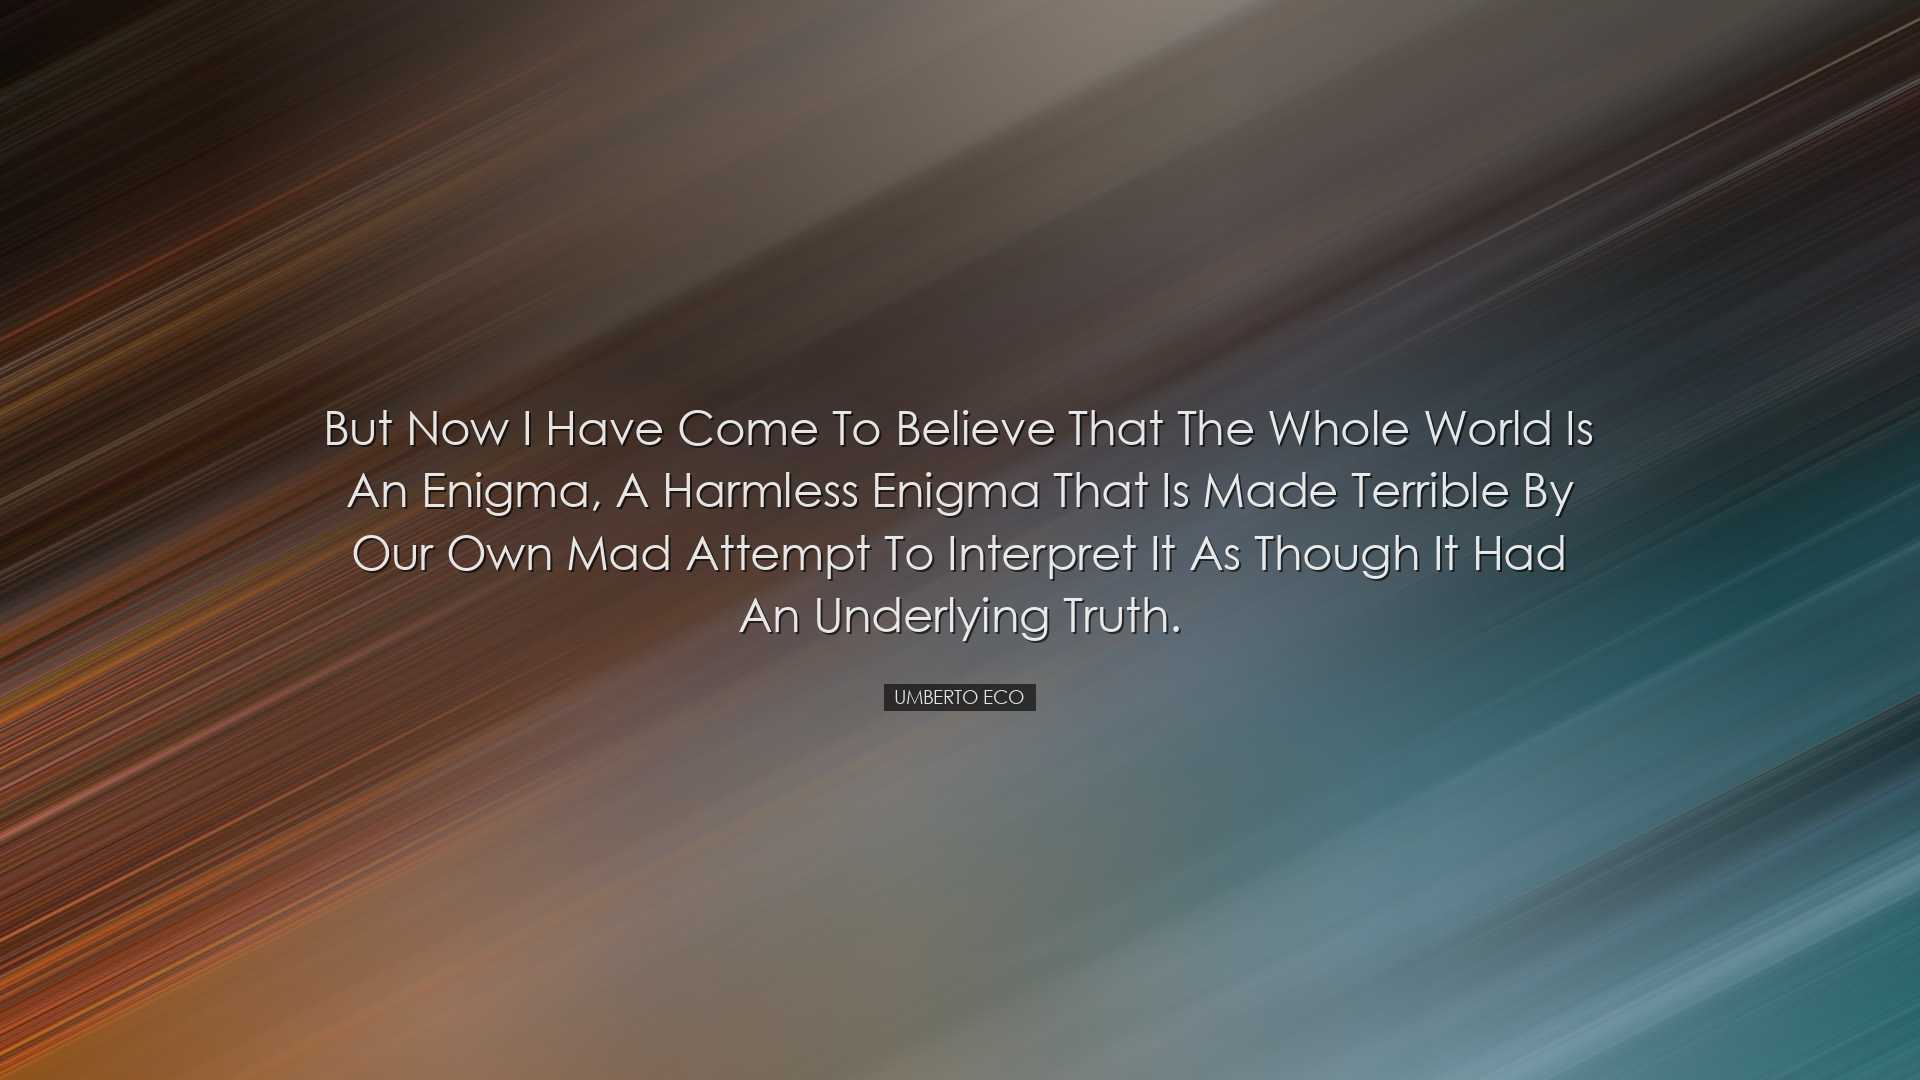 But now I have come to believe that the whole world is an enigma,